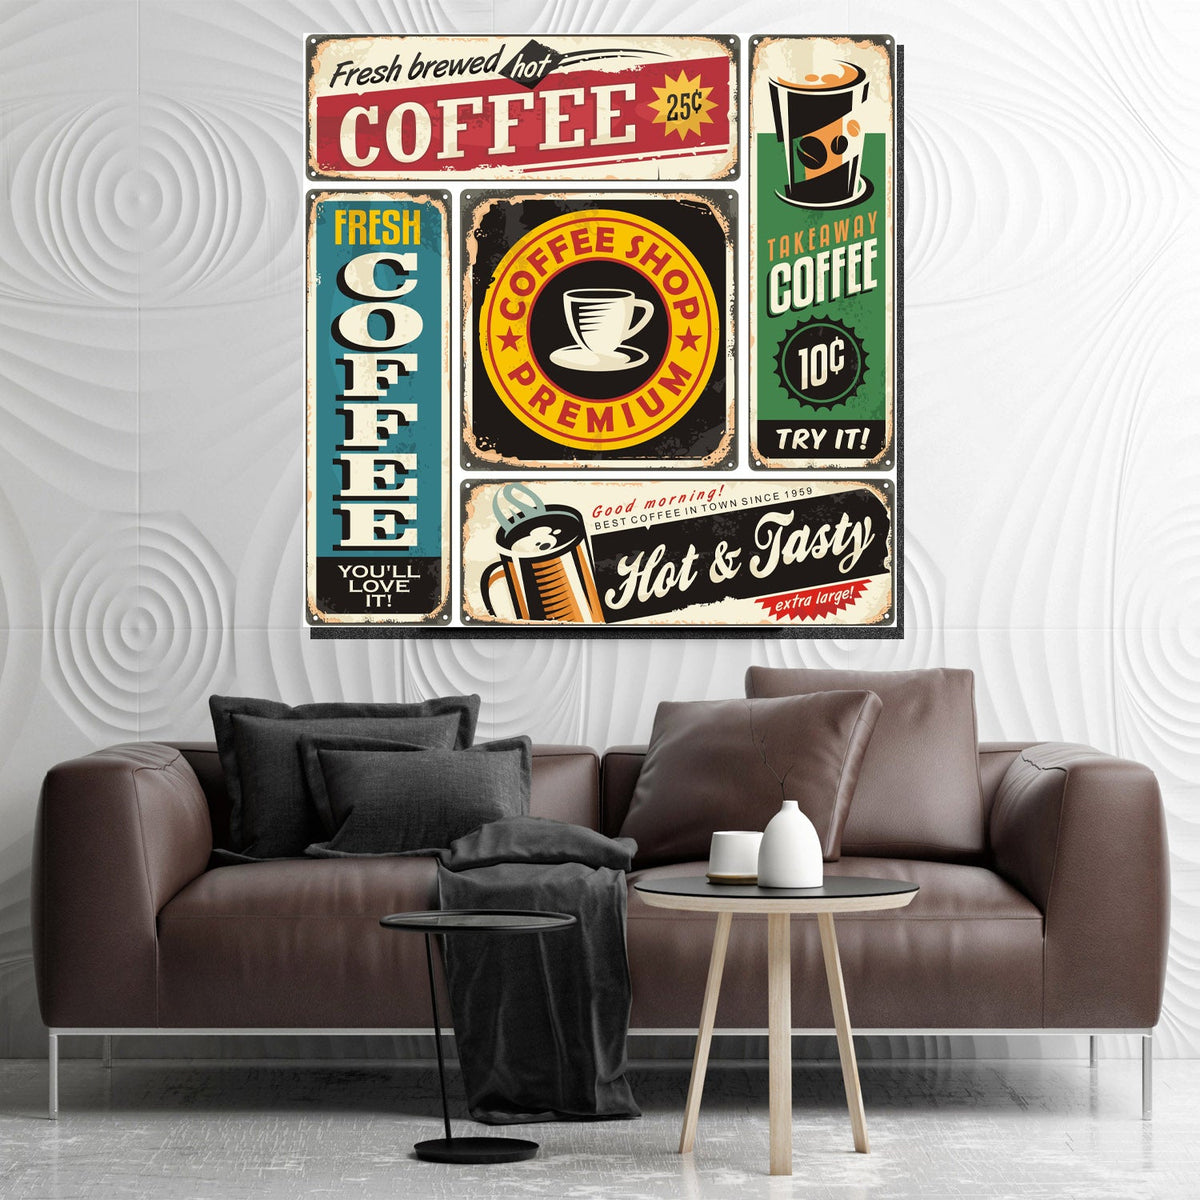 https://cdn.shopify.com/s/files/1/0387/9986/8044/products/MetalCoffeeSignCanvasArtprintStretched-1.jpg